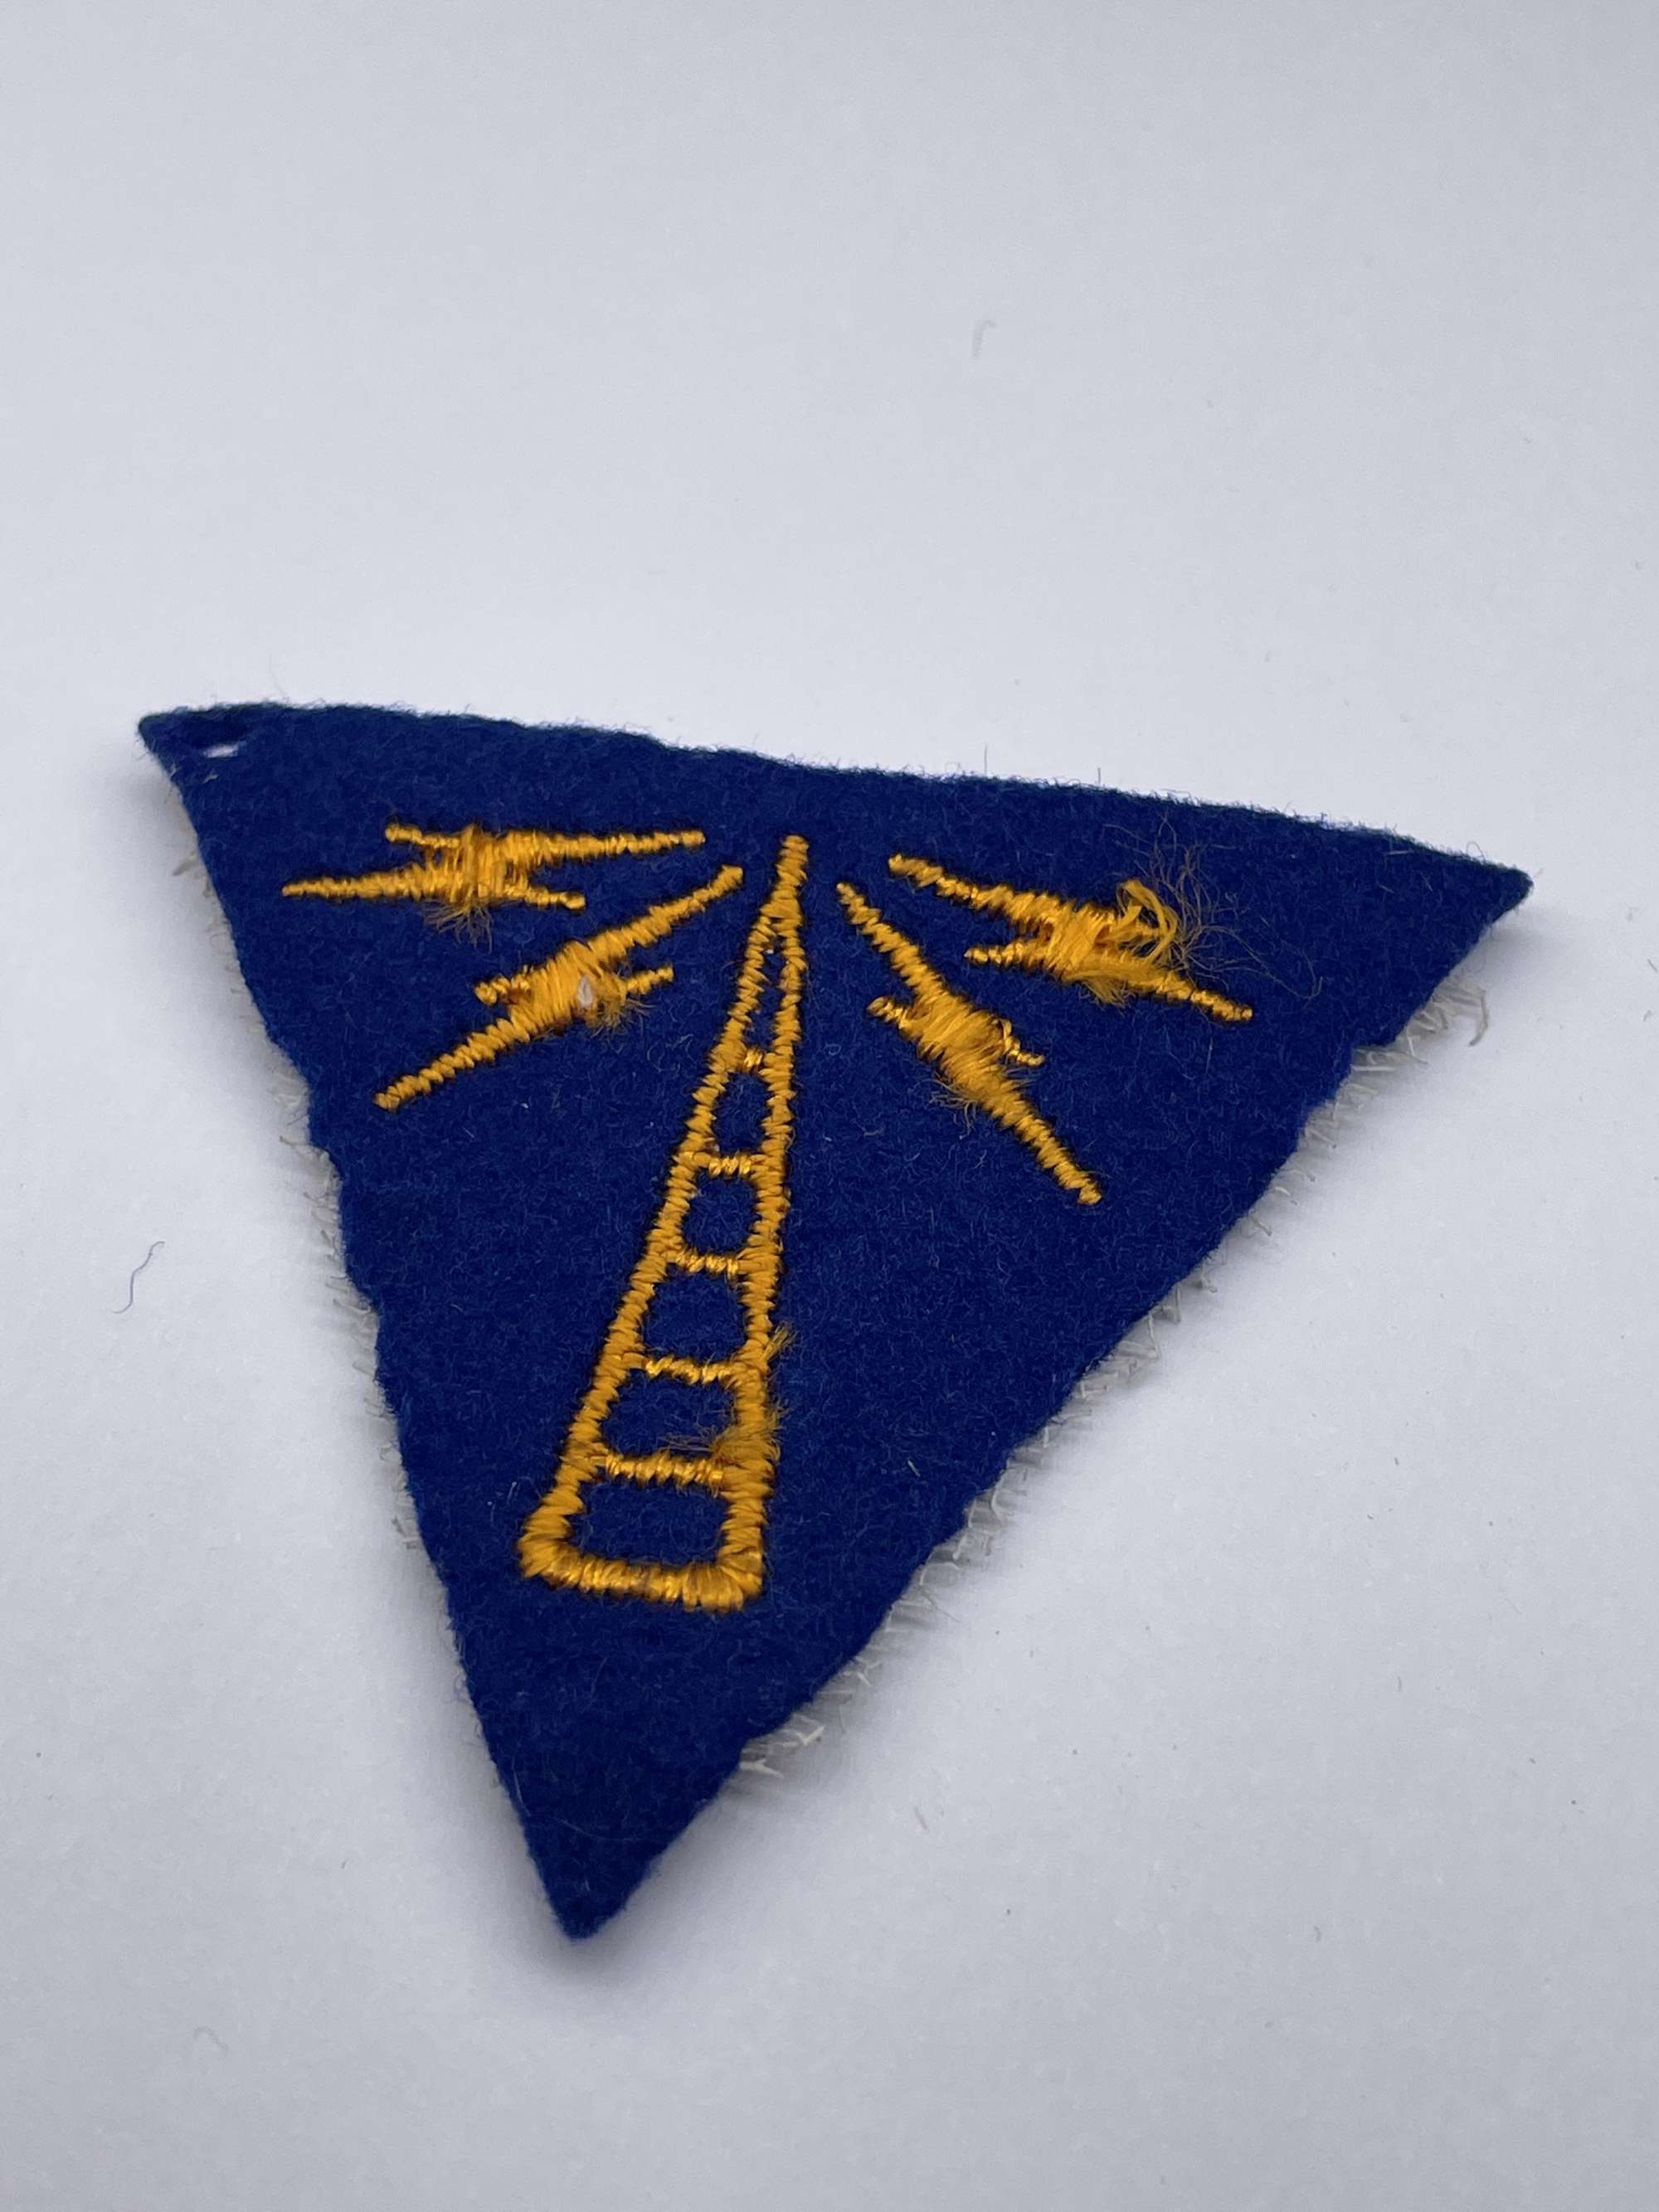 Original World War Two American Communications Specialist Sleeve Patch, 